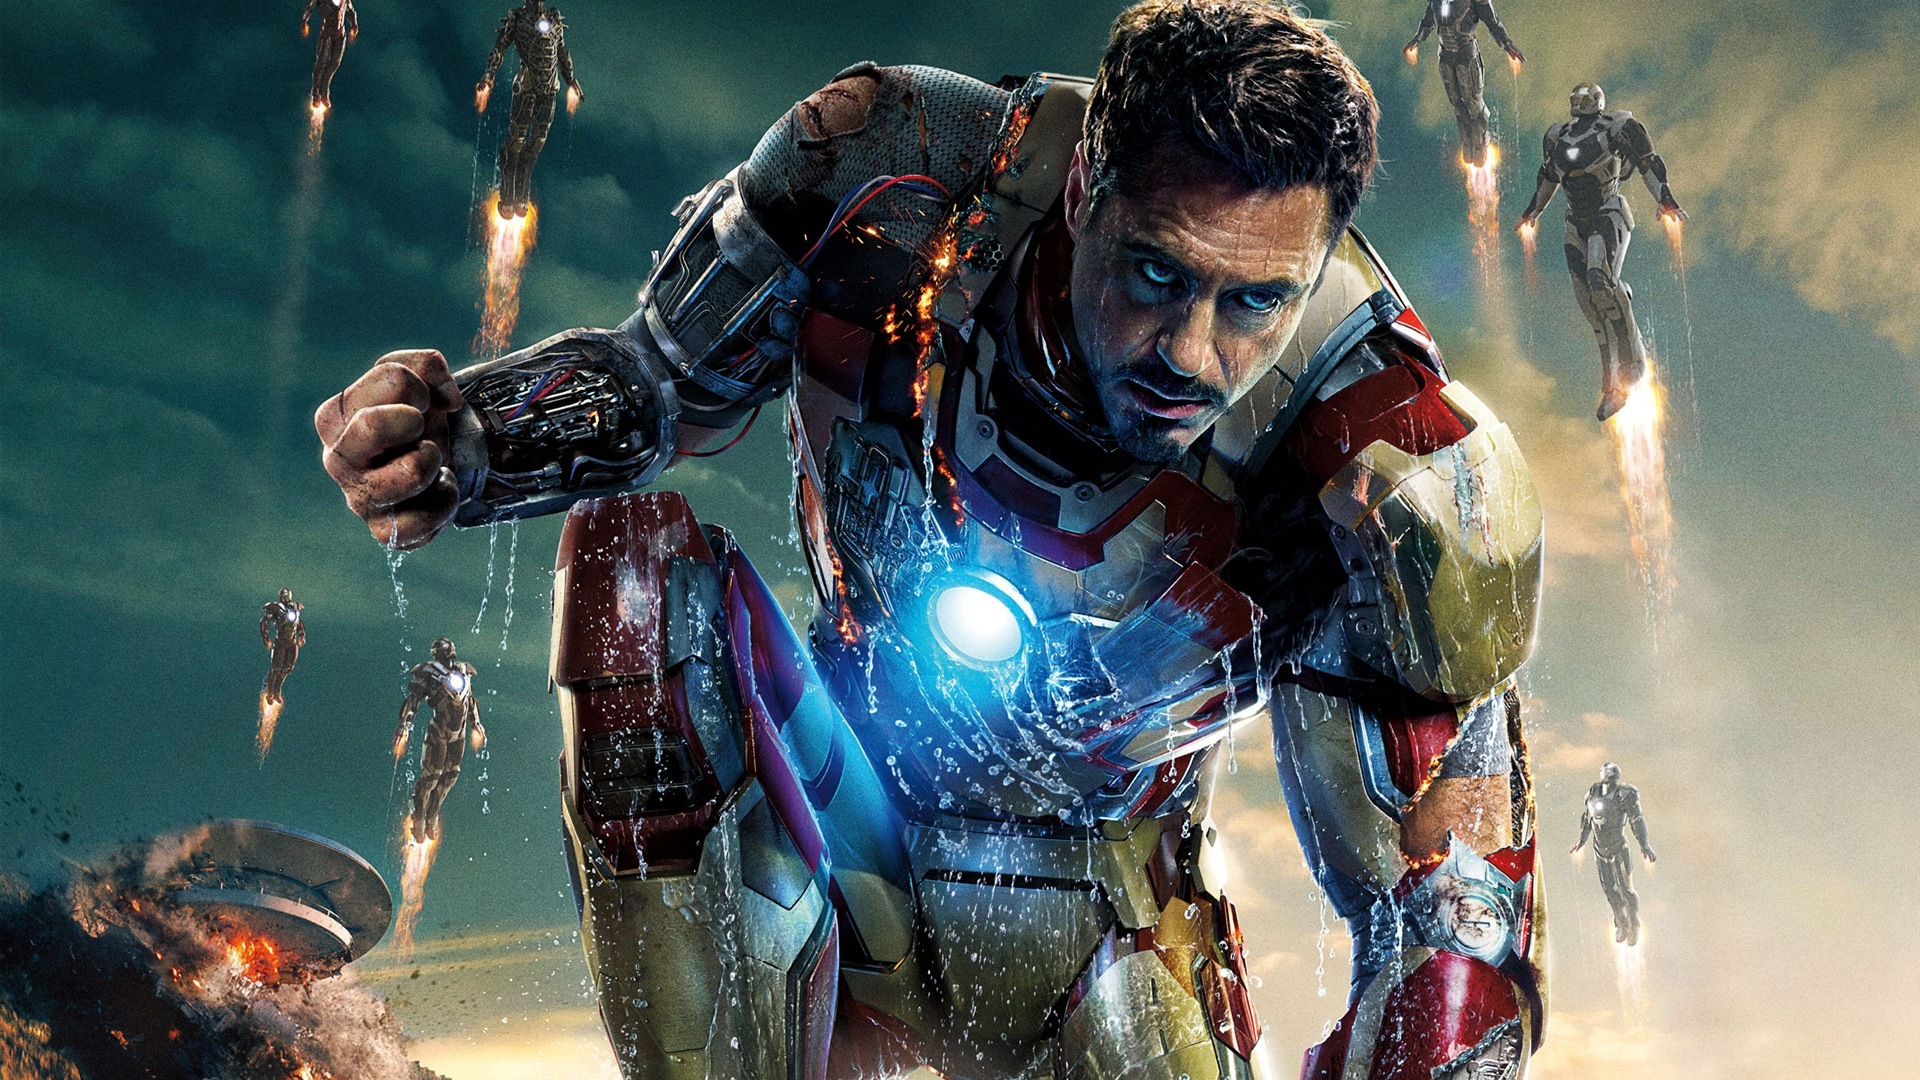 2013 Iron Man 3 newest HD wallpapers #12 - 1920x1080